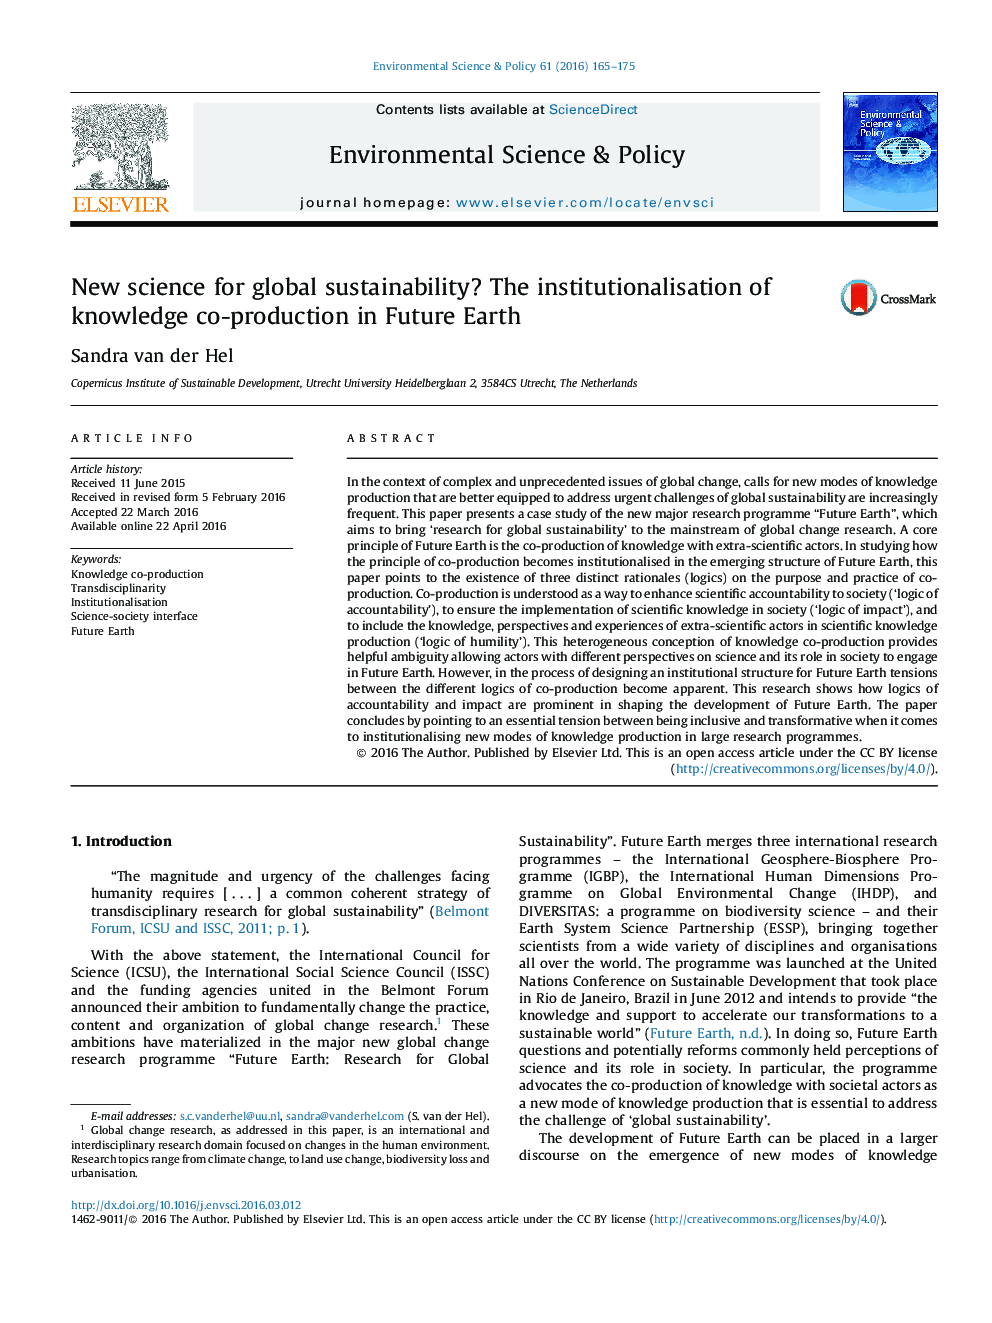 New science for global sustainability? The institutionalisation of knowledge co-production in Future Earth